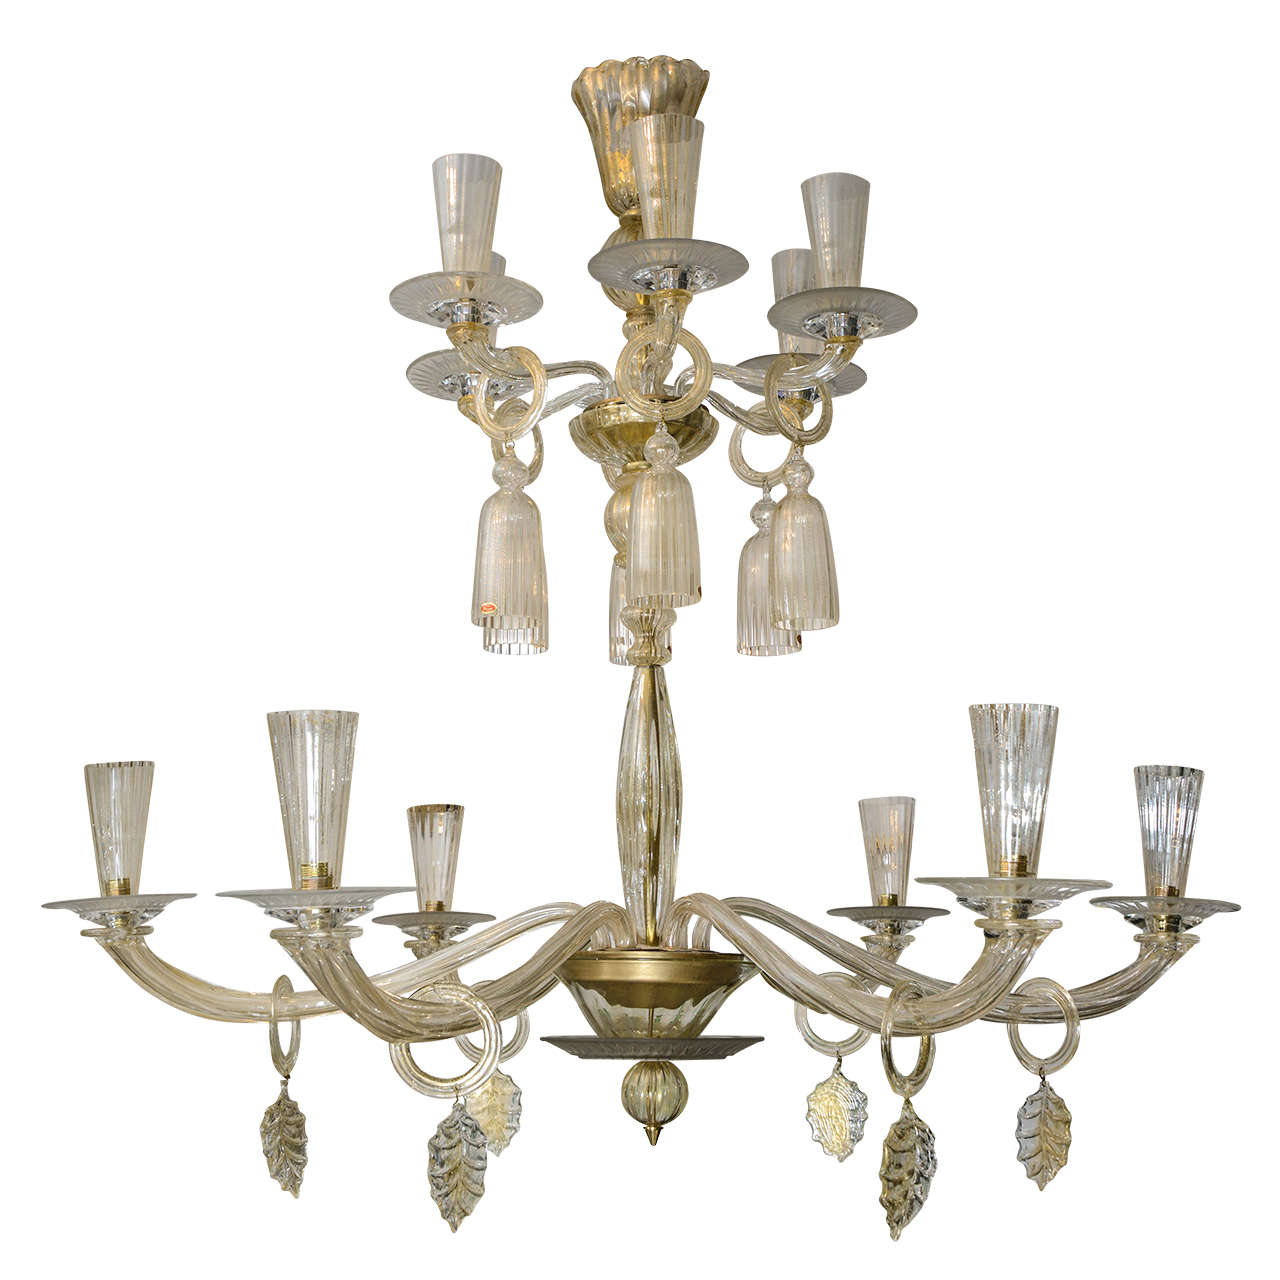 Gorgeous Chandelier in Gold Murano Glass with Twelve Arms of Light